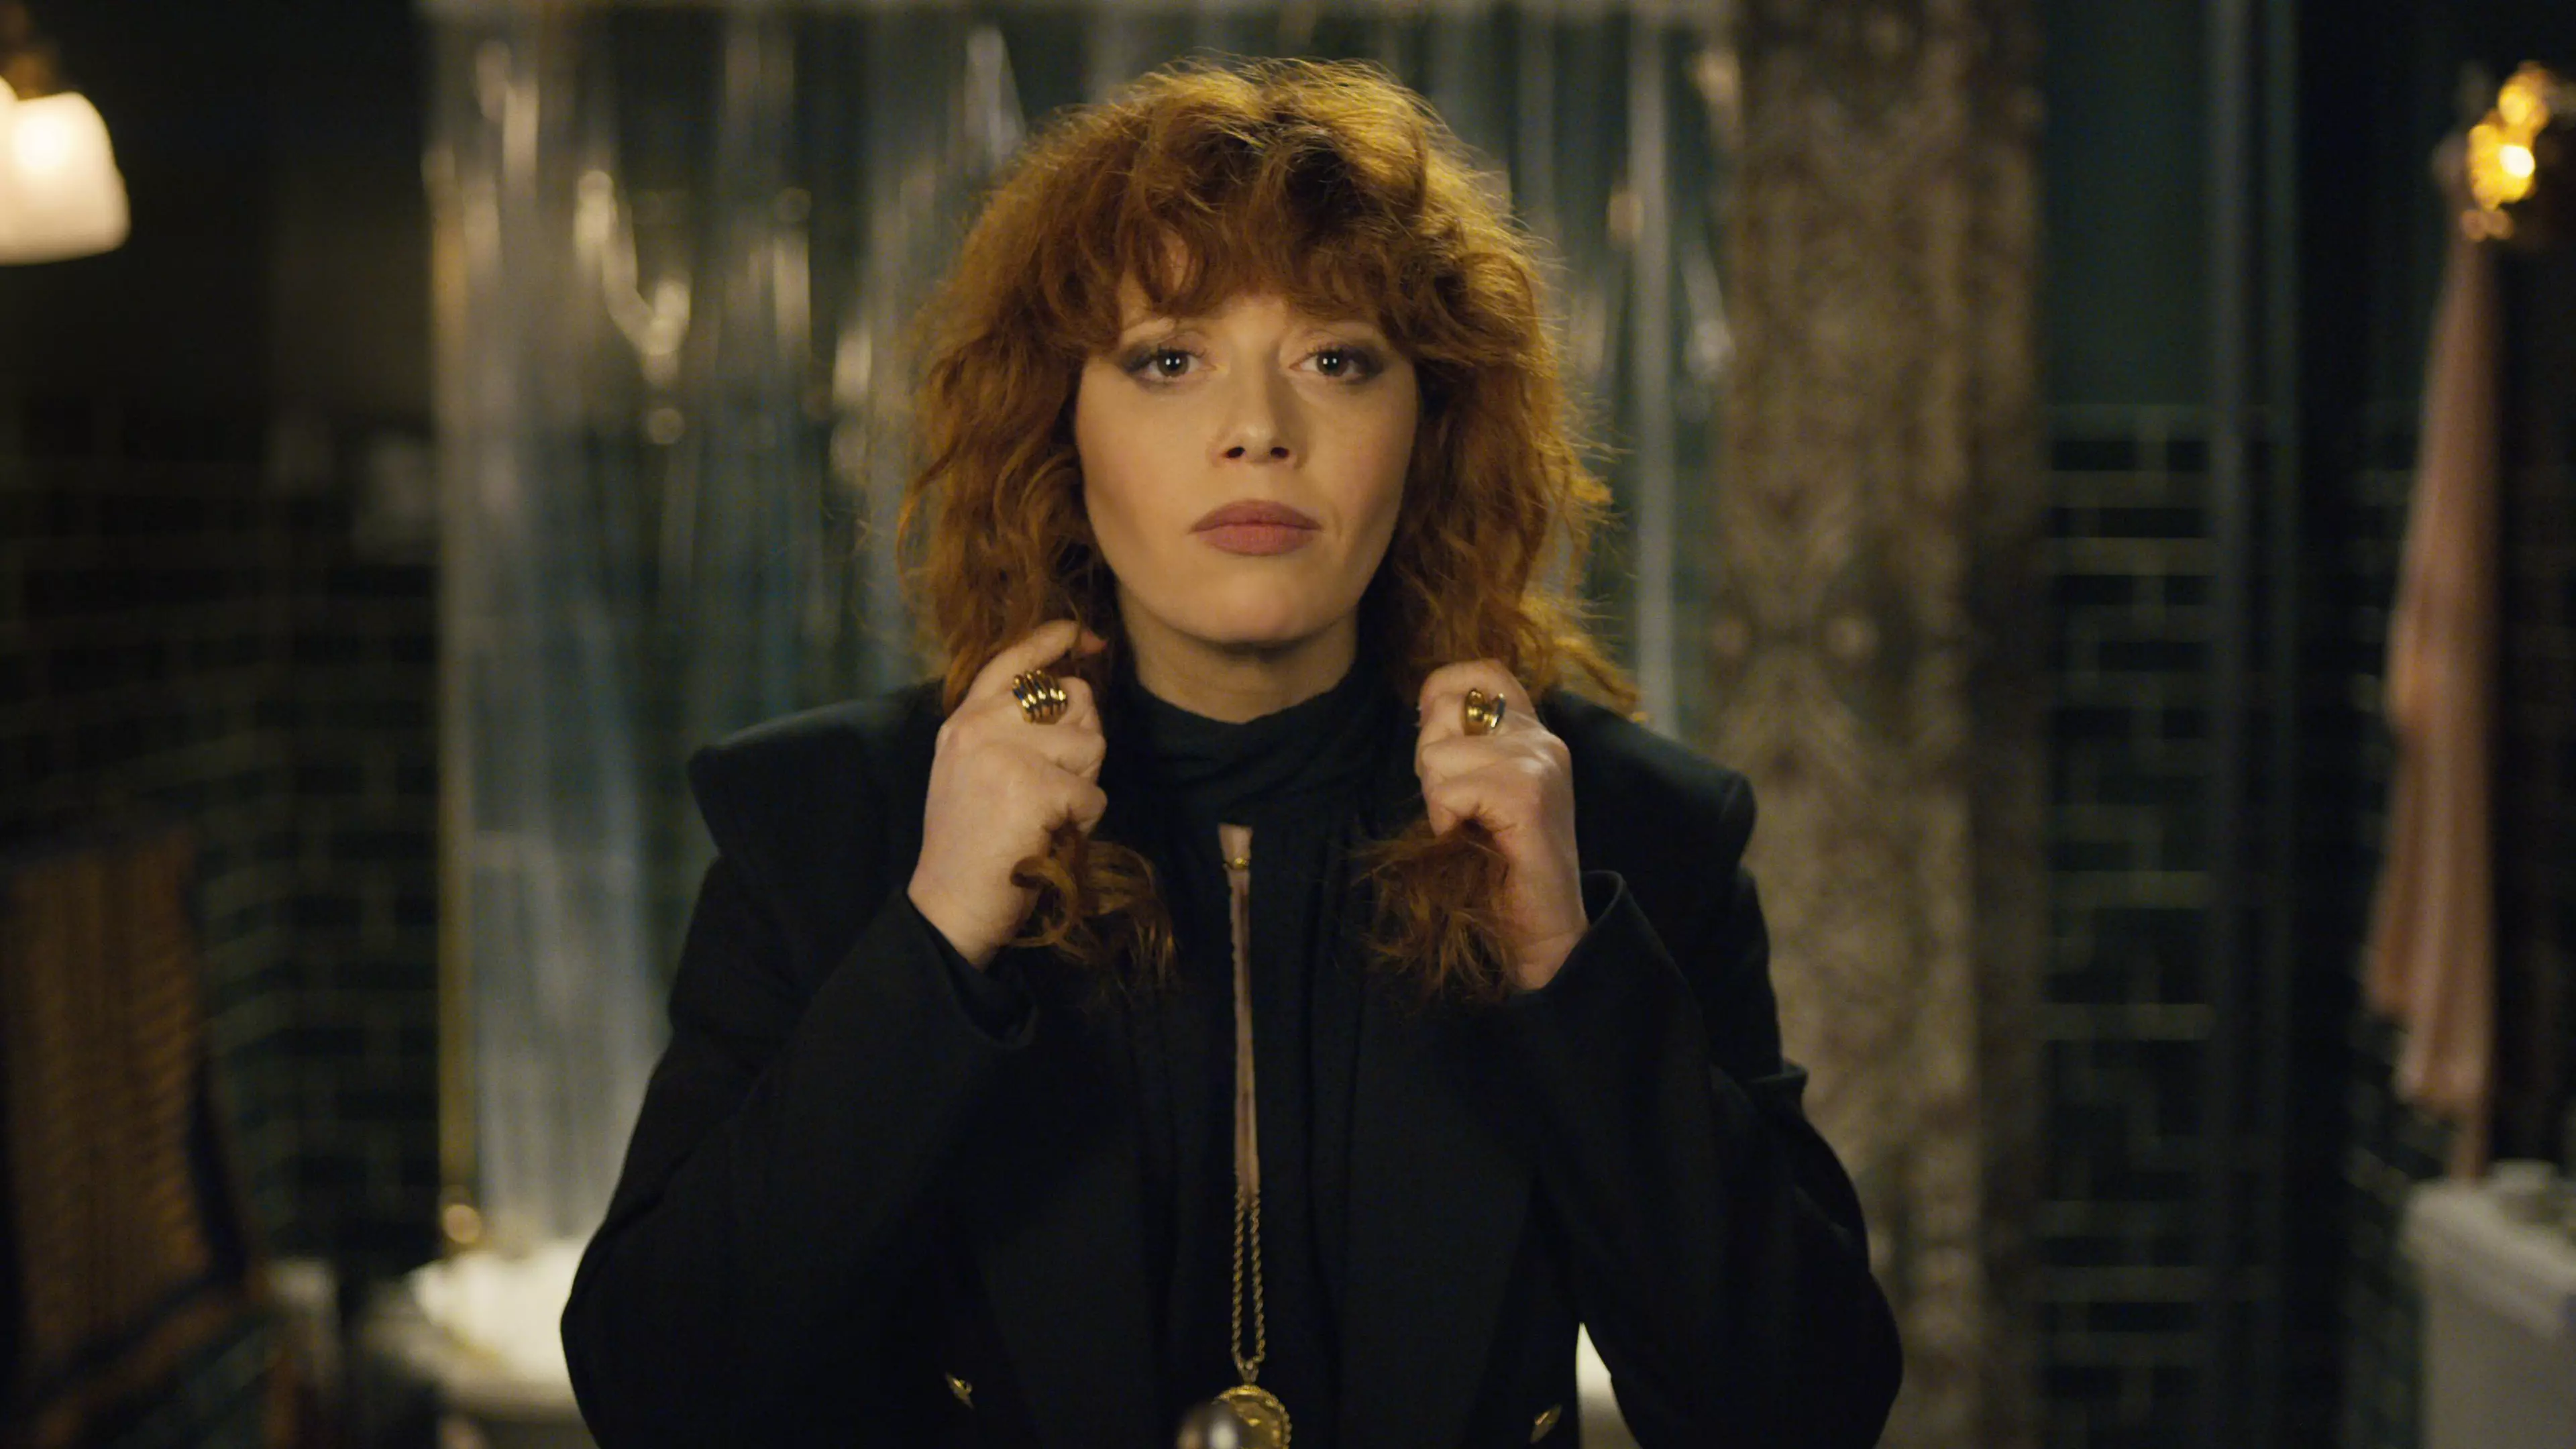 'Russian Doll' Is The Twisted Netflix Series You Need To Watch Next